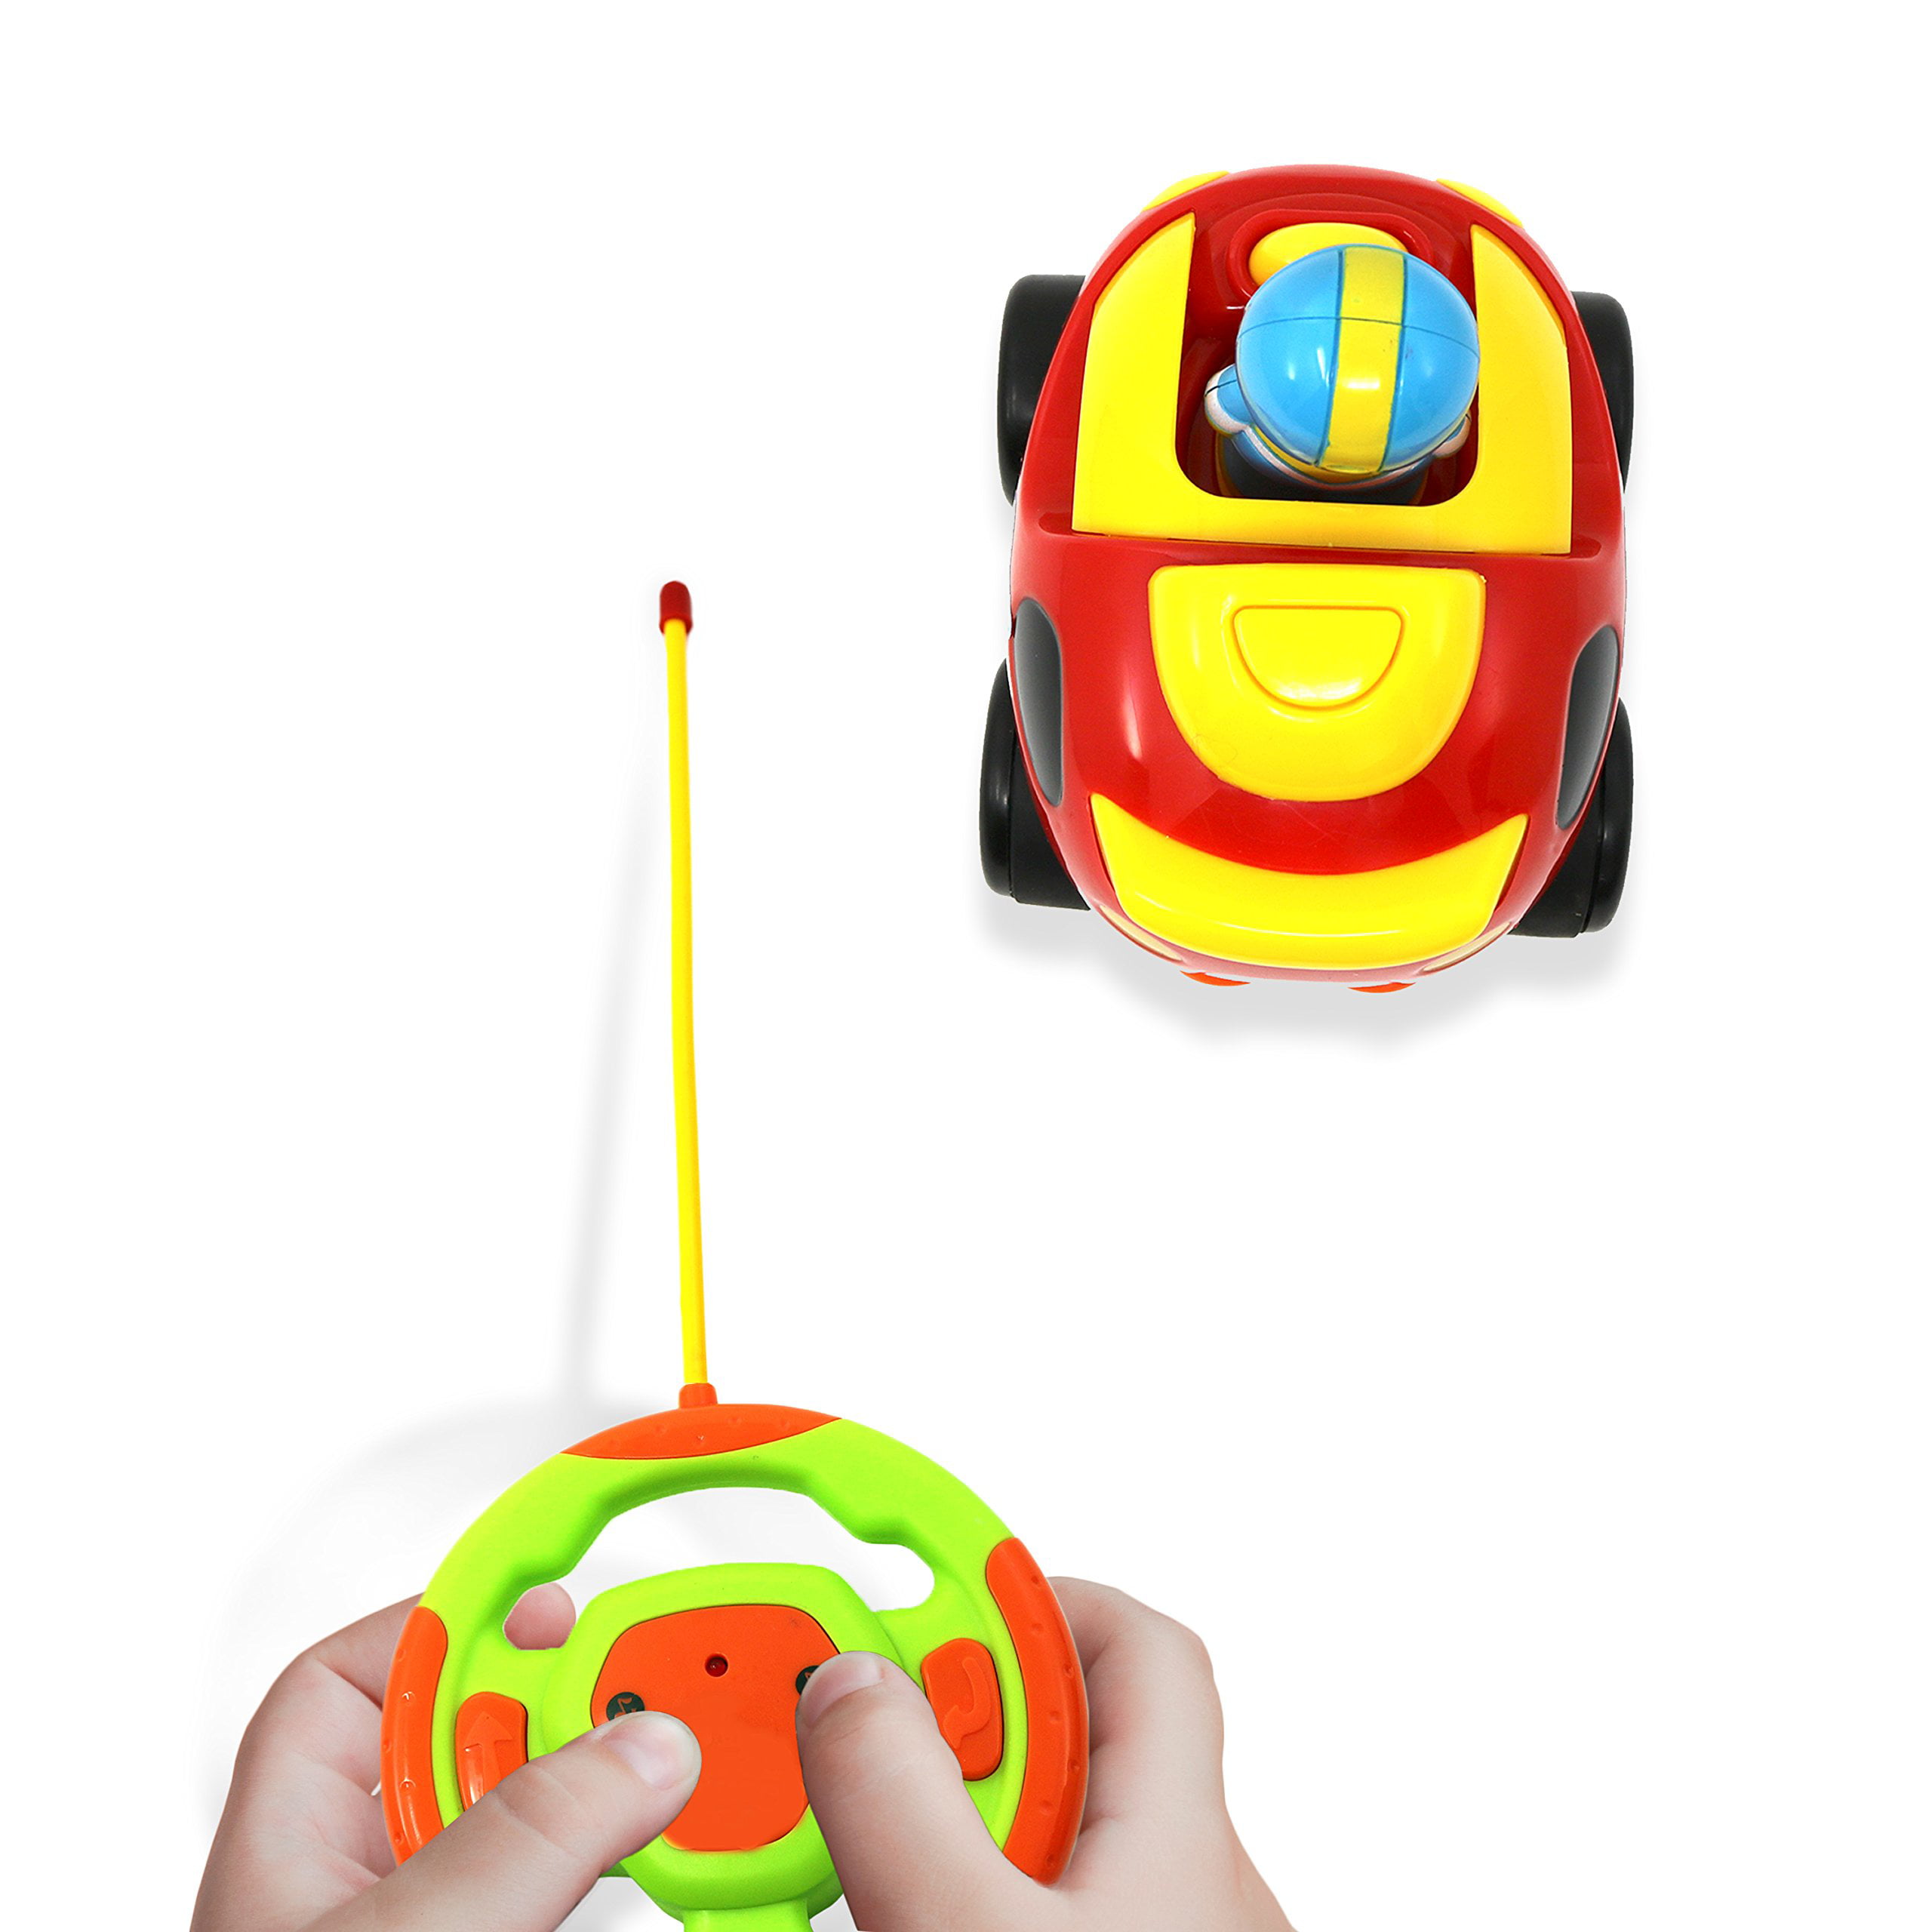 Remote Control Car For Toddlers - Kids Rc Cartoon Big Mo's Toys Race Car –  Beginner's Remote Control for Toddlers and Kids with Sounds, Music,  Flashing Lights and Removable Driver Action Figure -